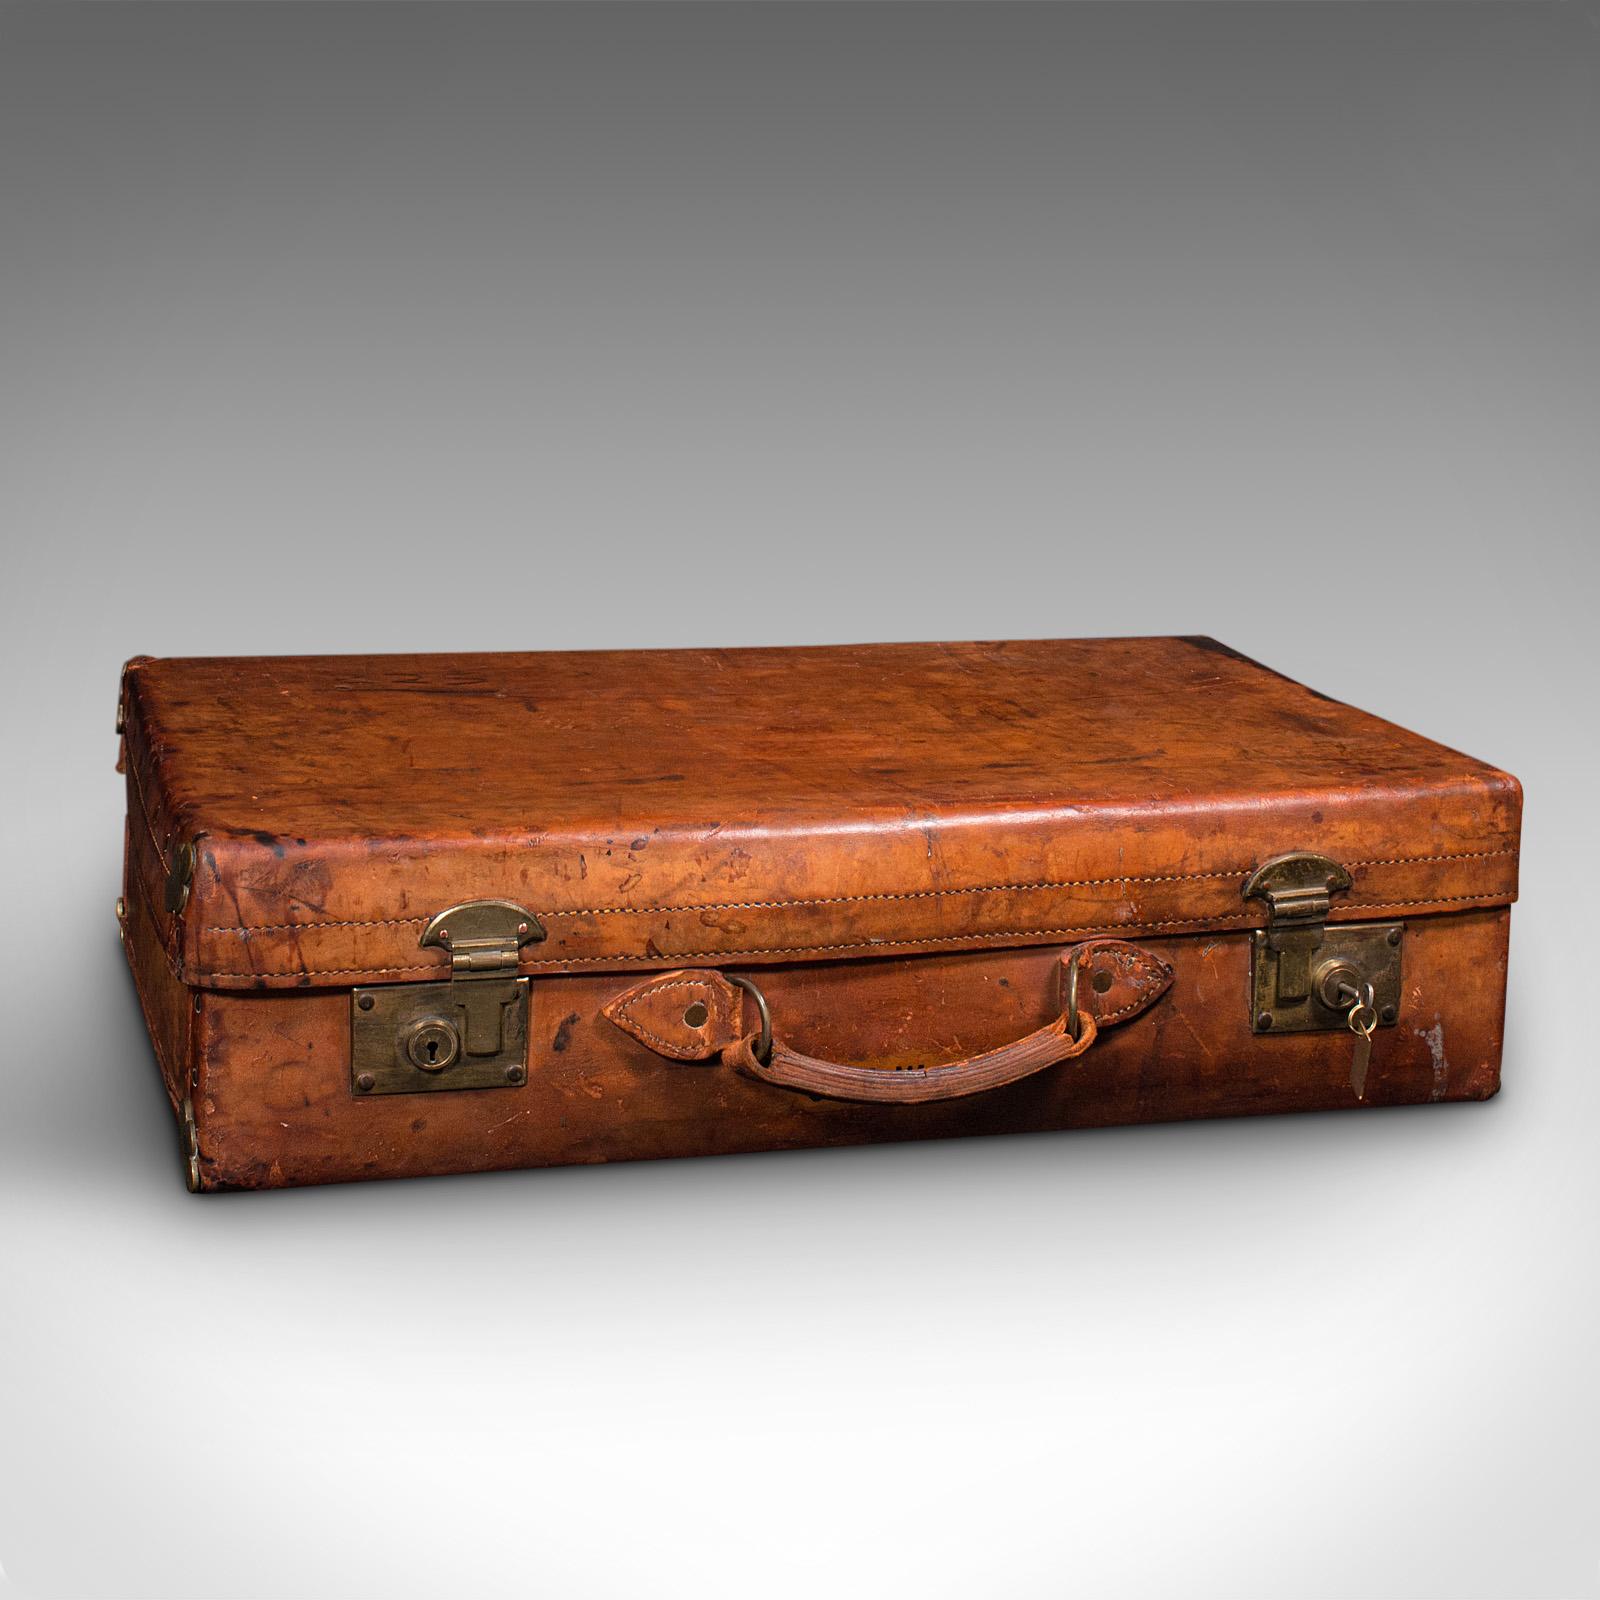 This is a large antique suitcase. An English, leather and brass gentleman's travelling case by Tom Hill - Sloane Street, dating to the Edwardian period, circa 1910.

Of superb size and finish, this case is a treat to carry
Displays a desirable